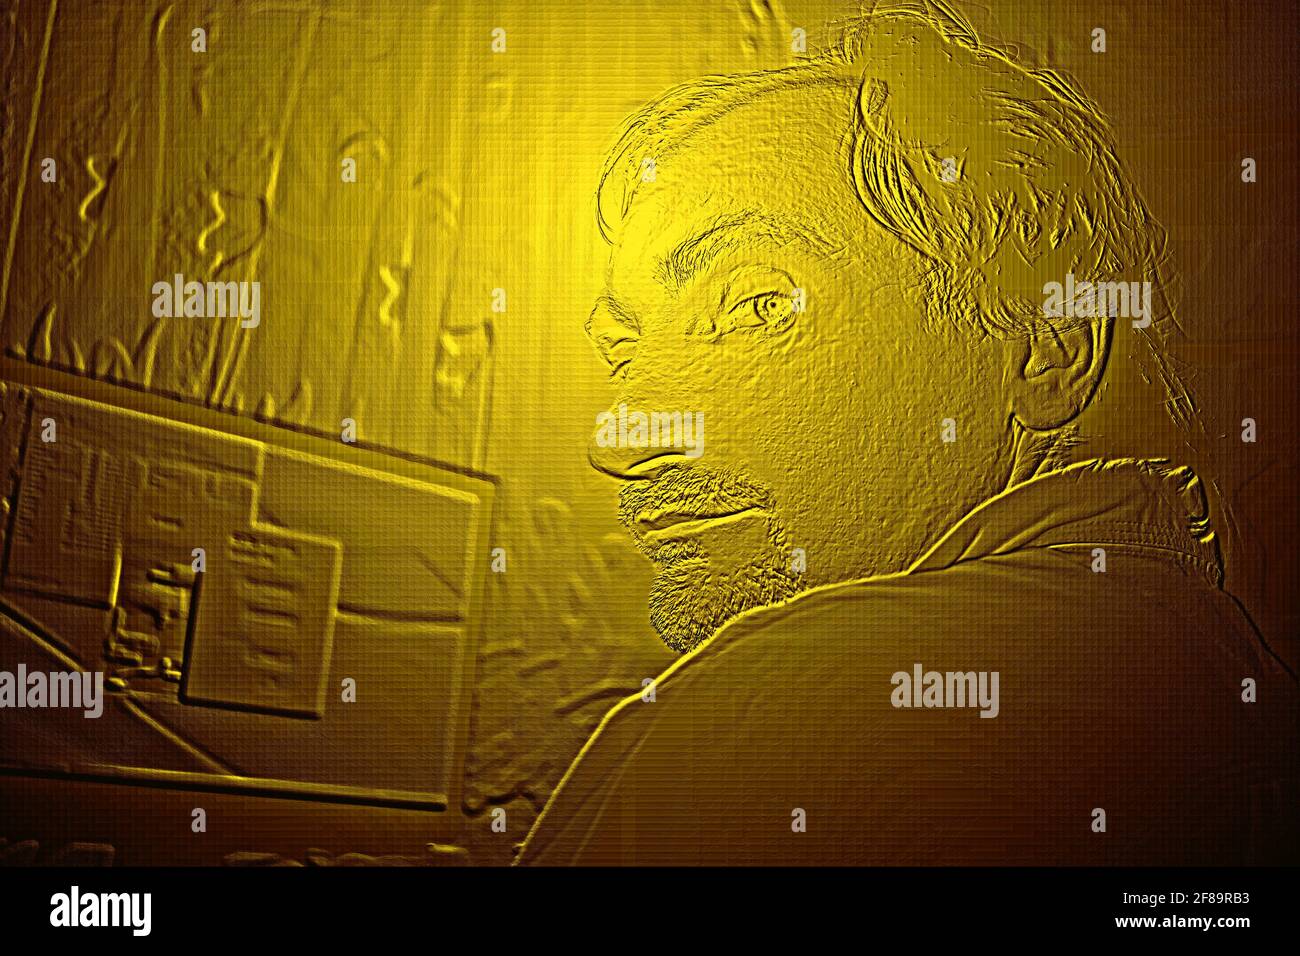 Man sits in a half-turn on a computer monitor, artistic pattern, art illustration in golden hues Stock Photo